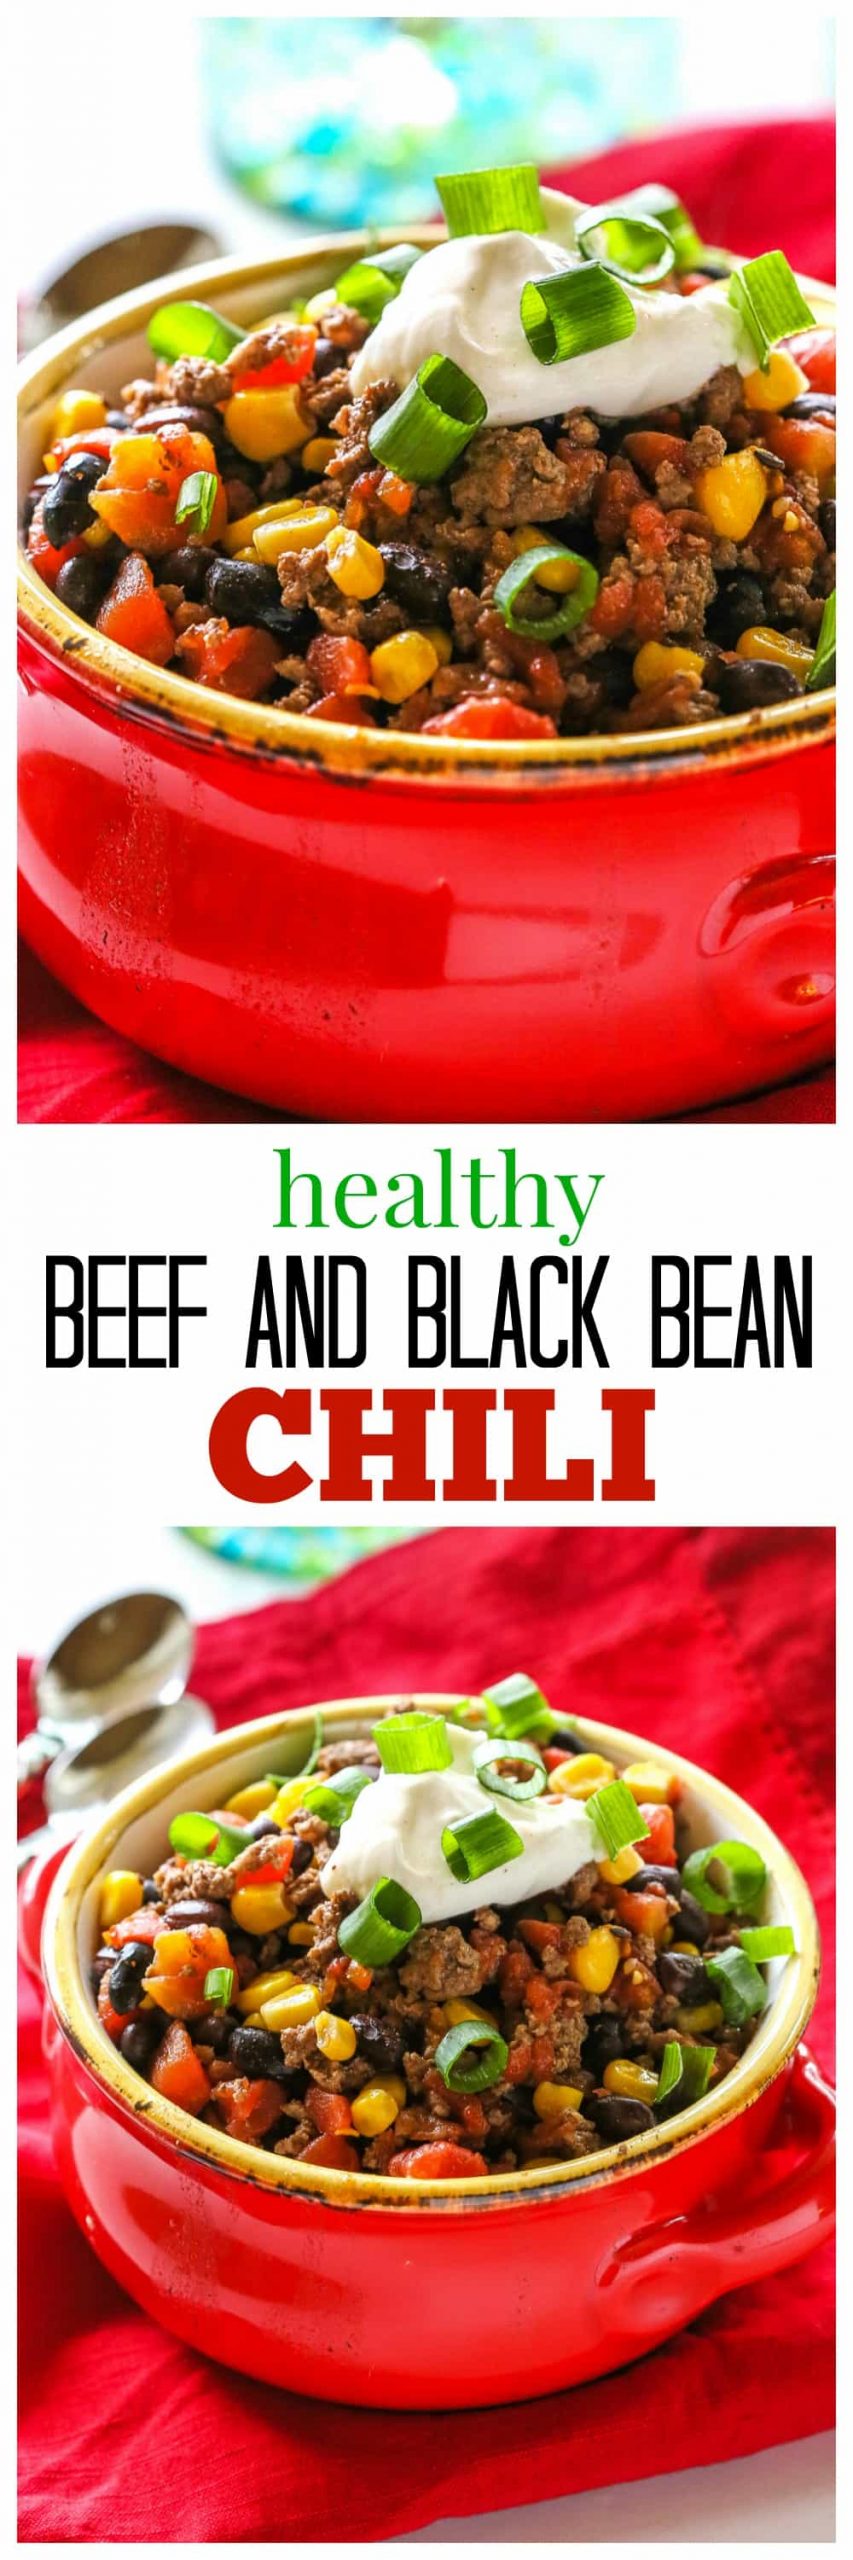 fb image scaled - Healthy Spicy Beef and Black Bean Chili